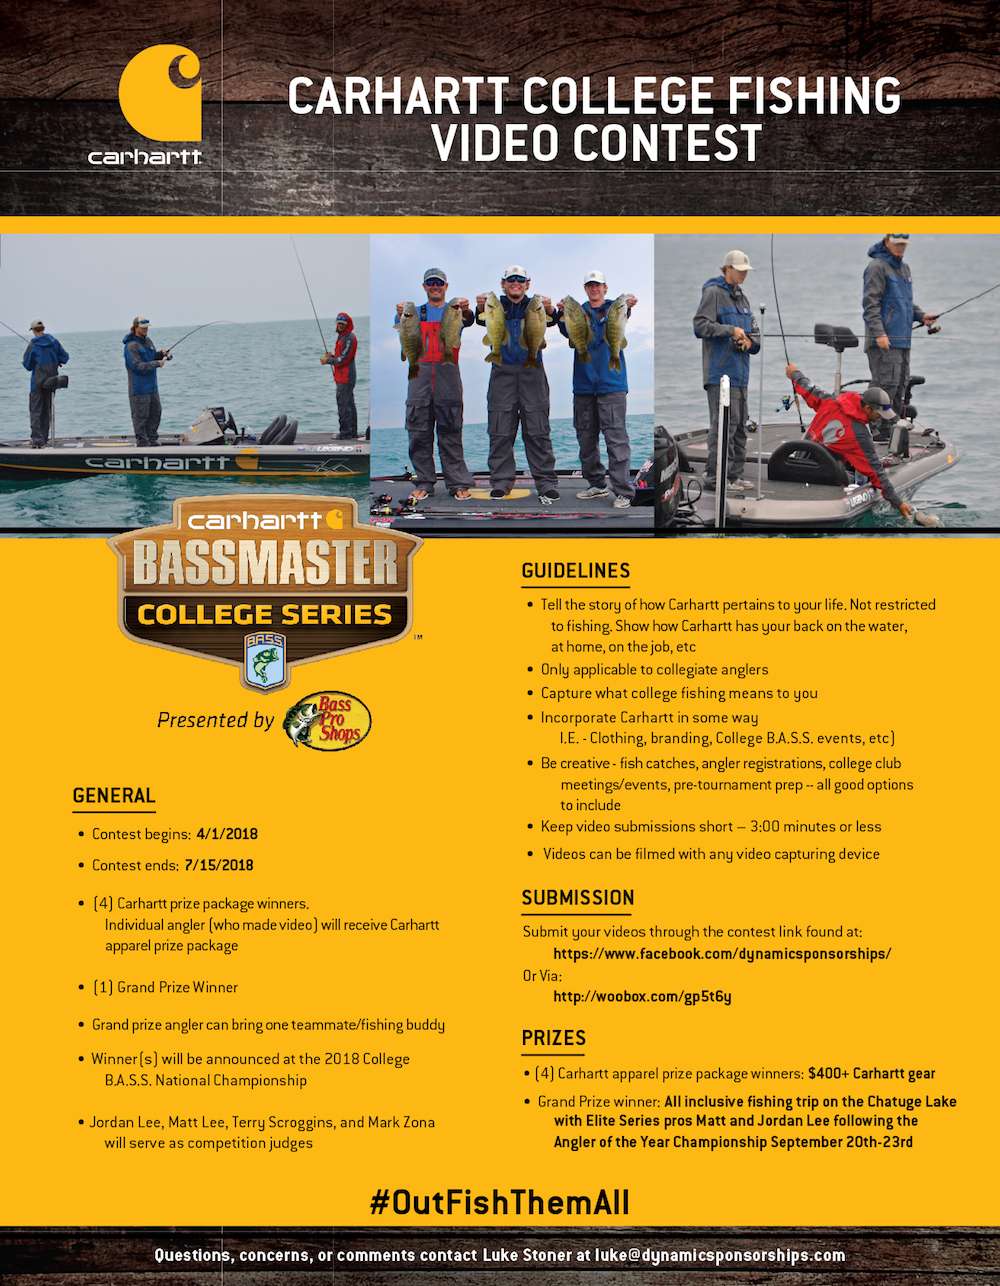 For the third consecutive year Carhartt offered a video contest for college anglers. An all-inclusive two-day fishing trip with Bassmaster pros Jordan Lee and Matt Lee was the Grand Prize.